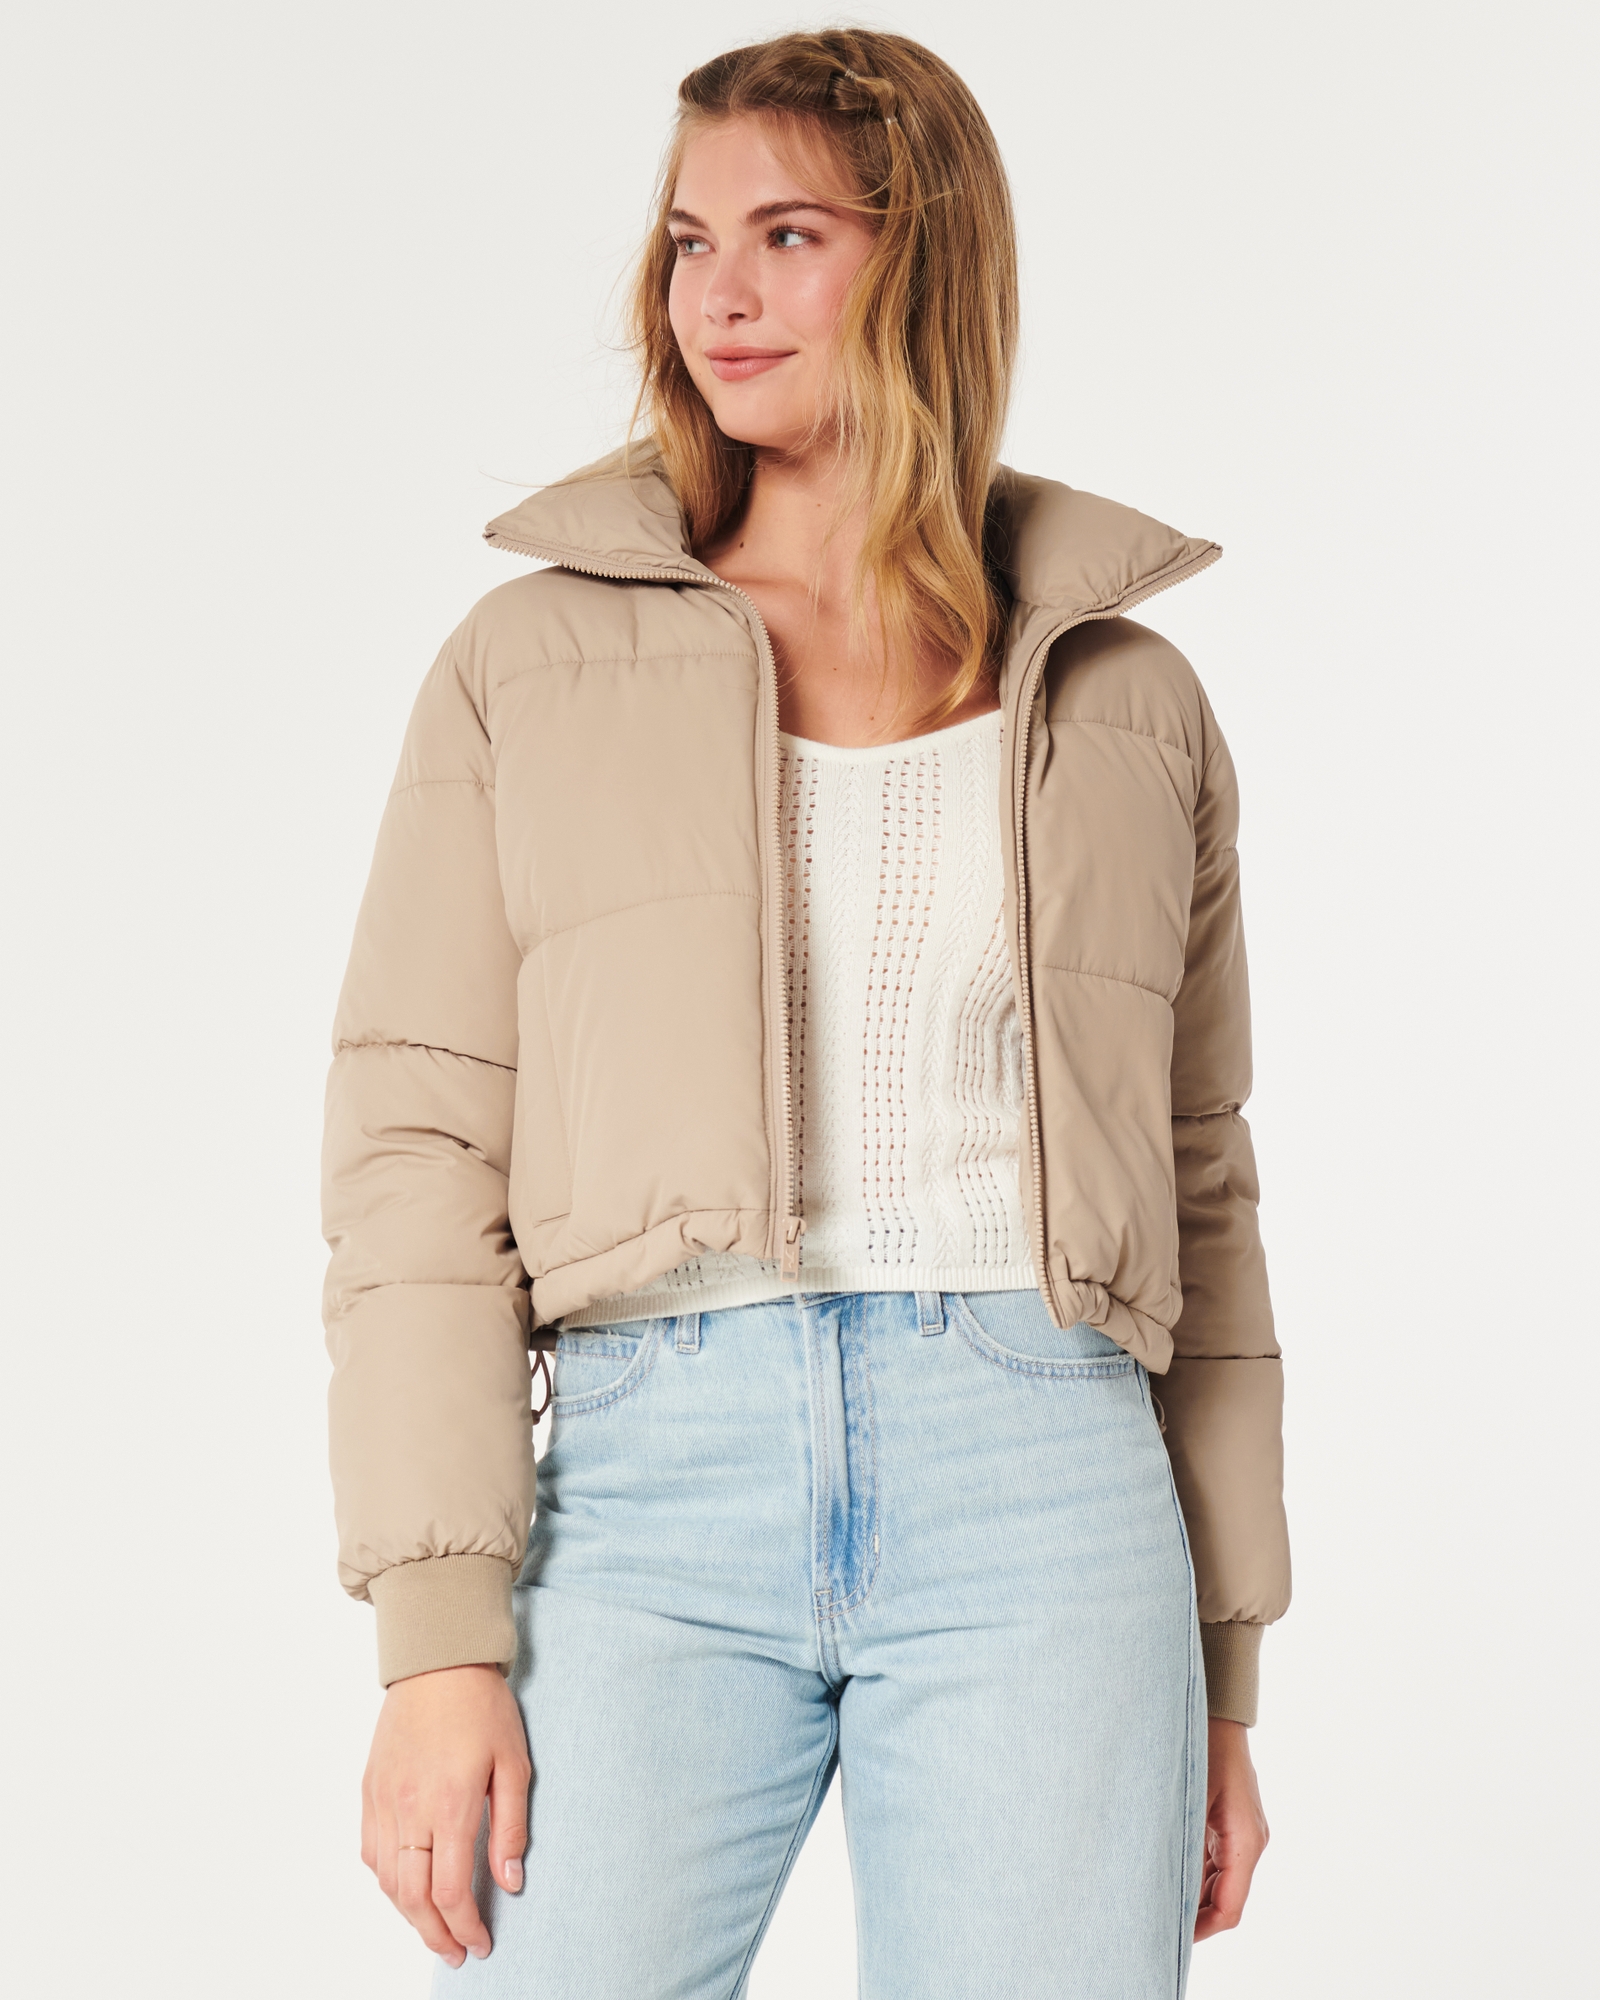 Hollister Puffer Jacket White - $75 (46% Off Retail) - From Leilani